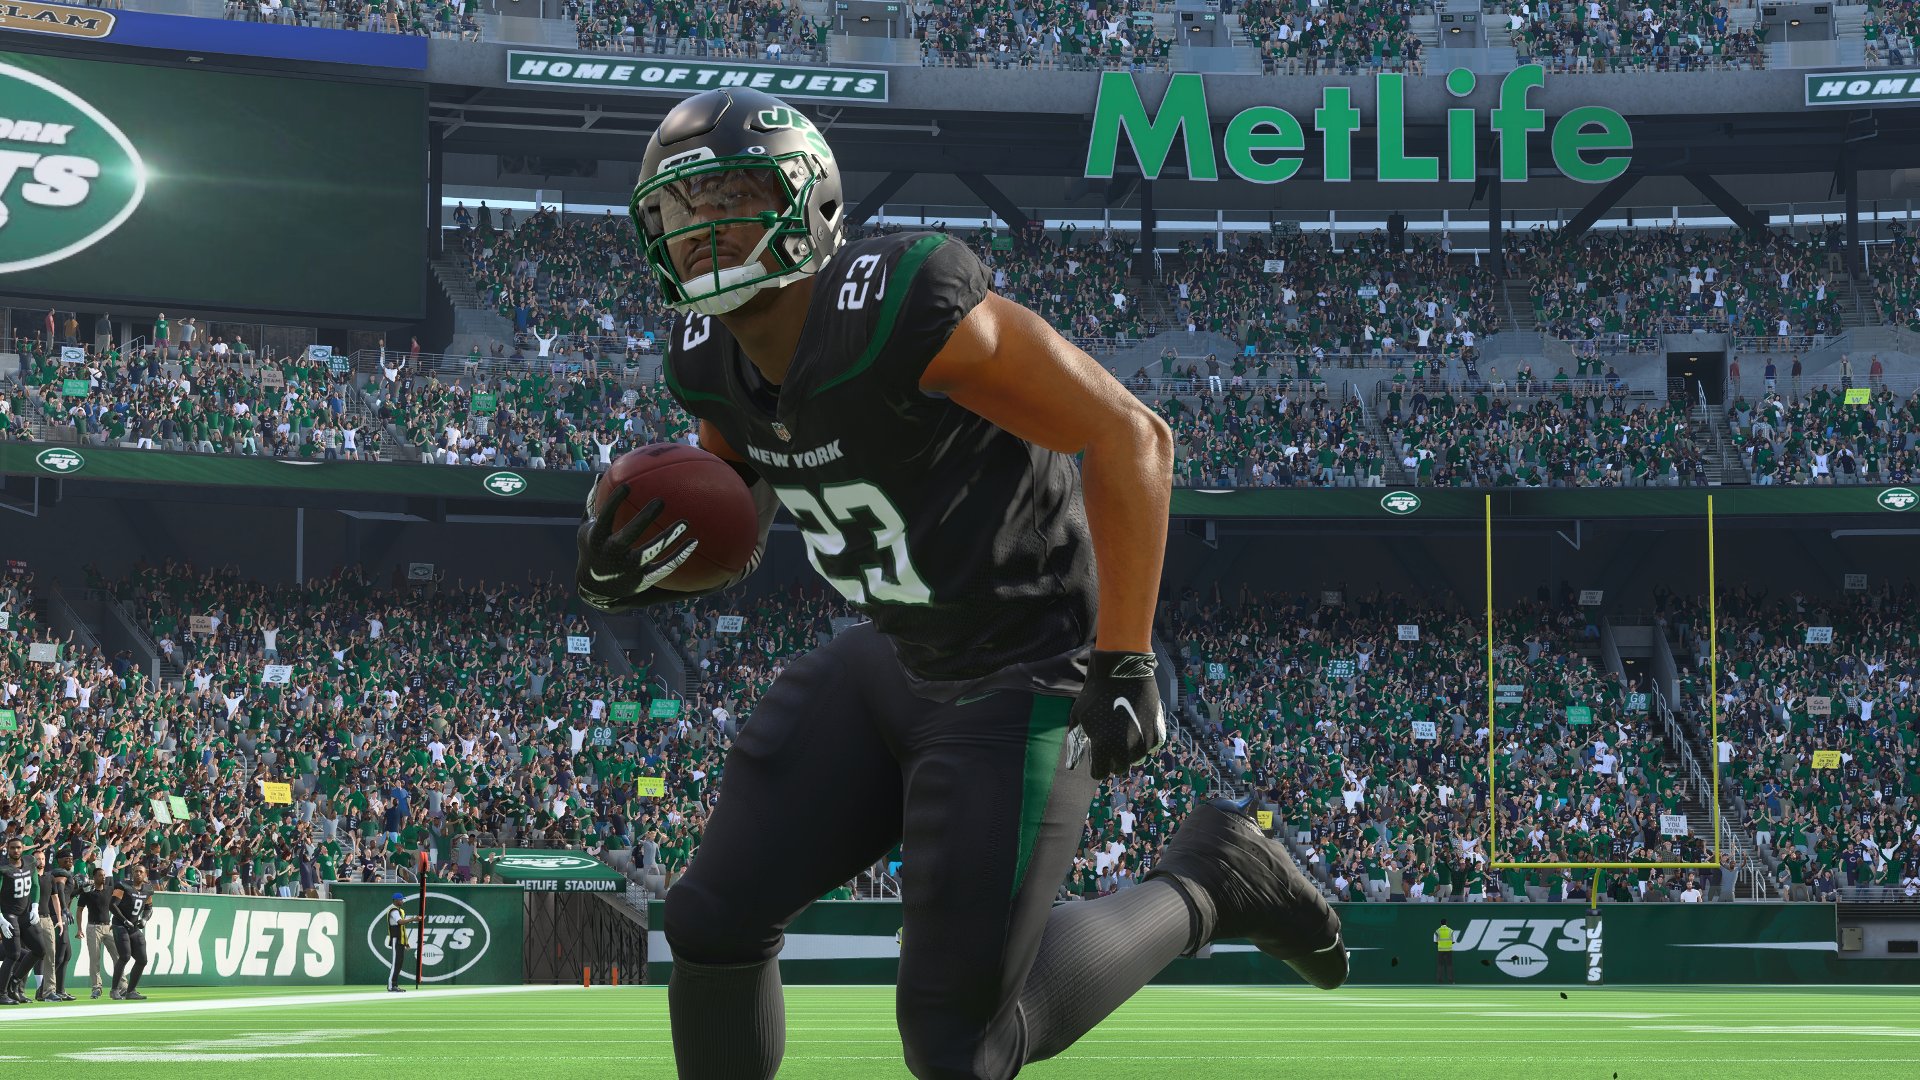 Madden NFL 23 - Season 4: Game Changers - Electronic Arts